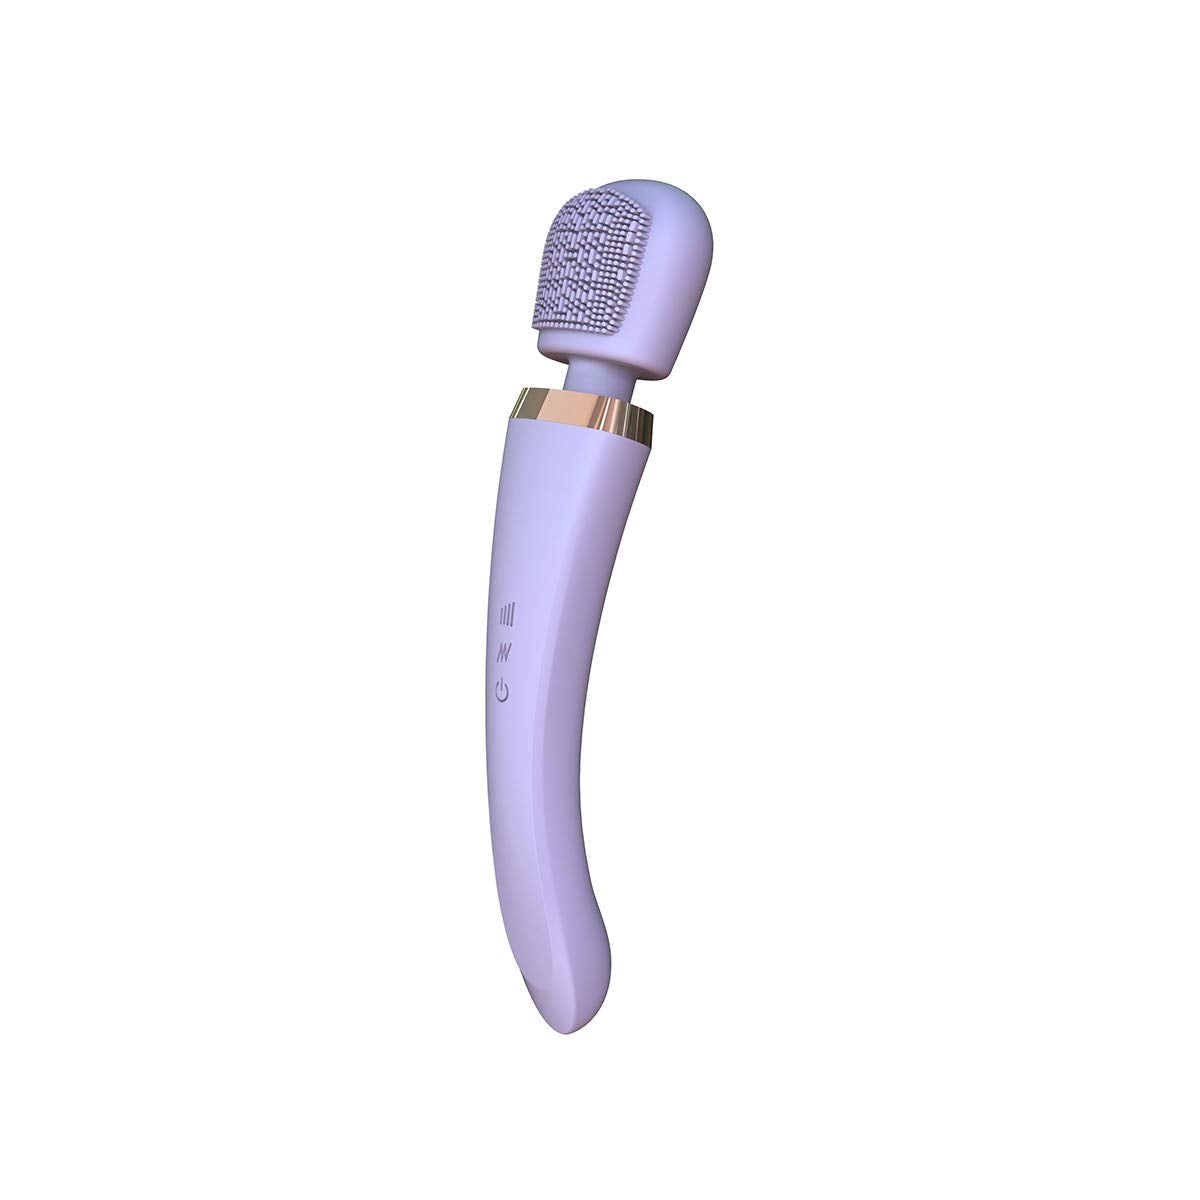 Goodup Electric Handheld Body Massager, 8 Speeds Rechargeable Waterproof Personal Massager （Purple） - Home Decor Gifts and More